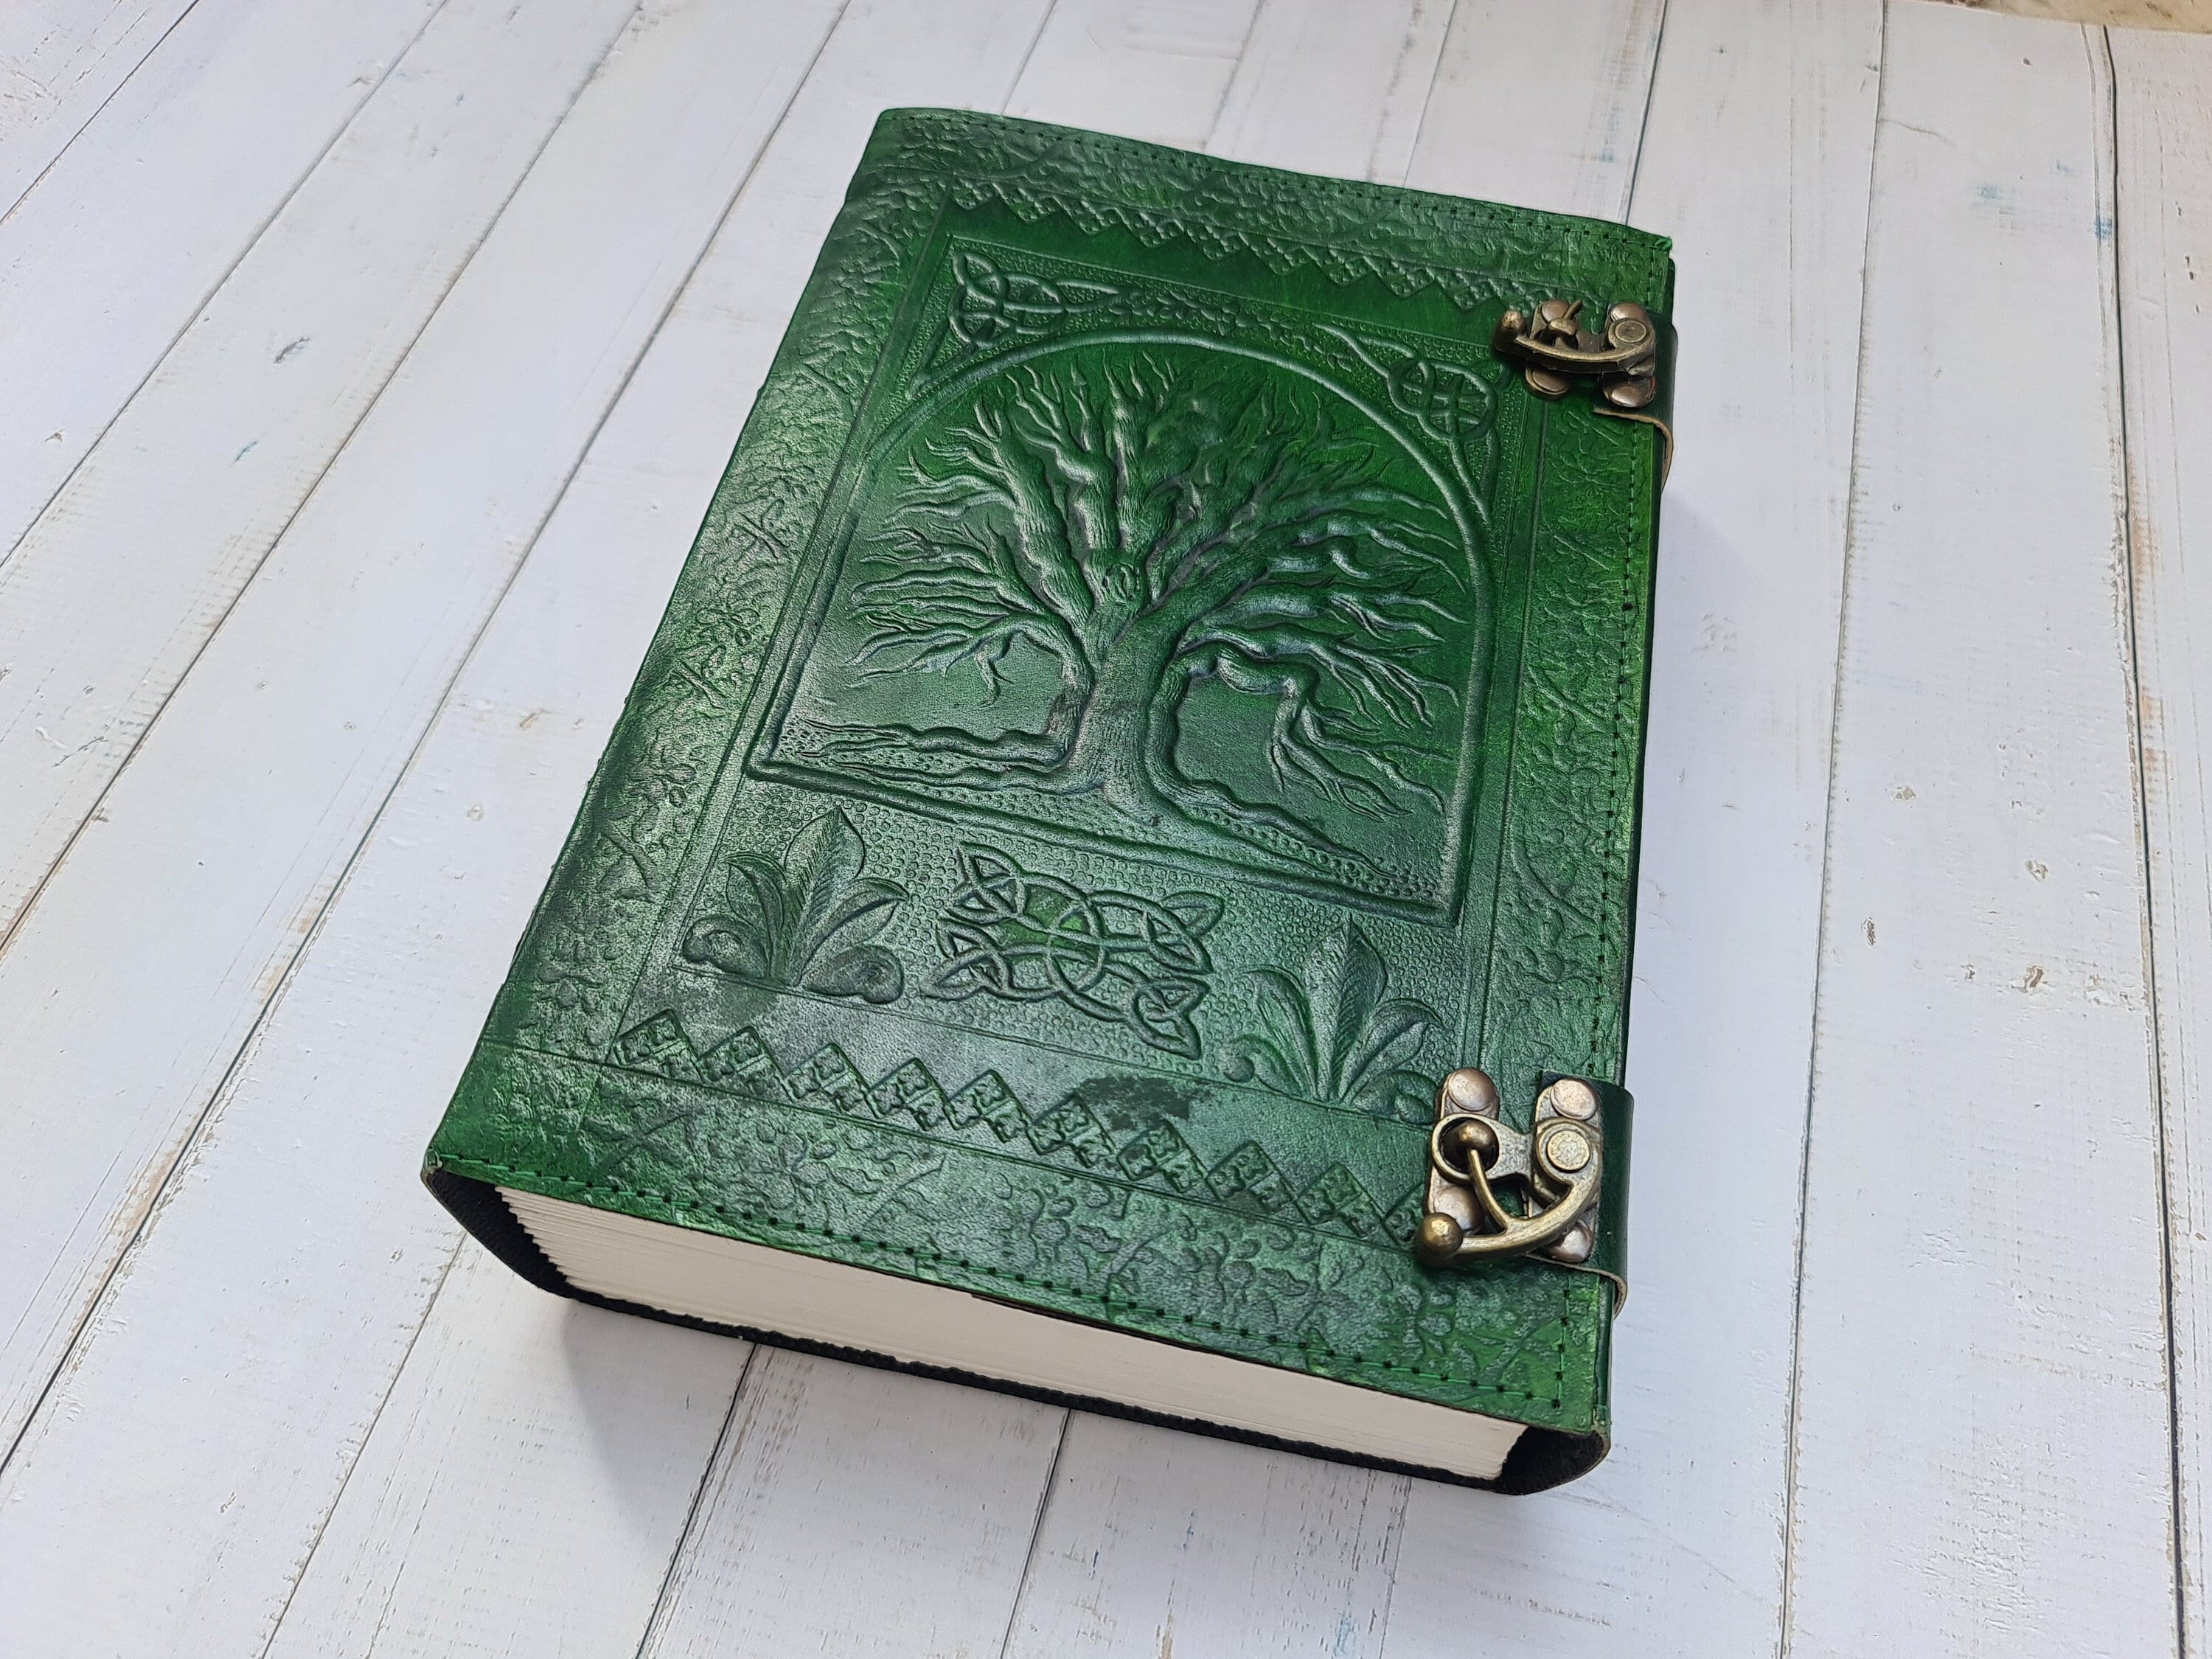 I made a lord of the rings journal : r/Leathercraft